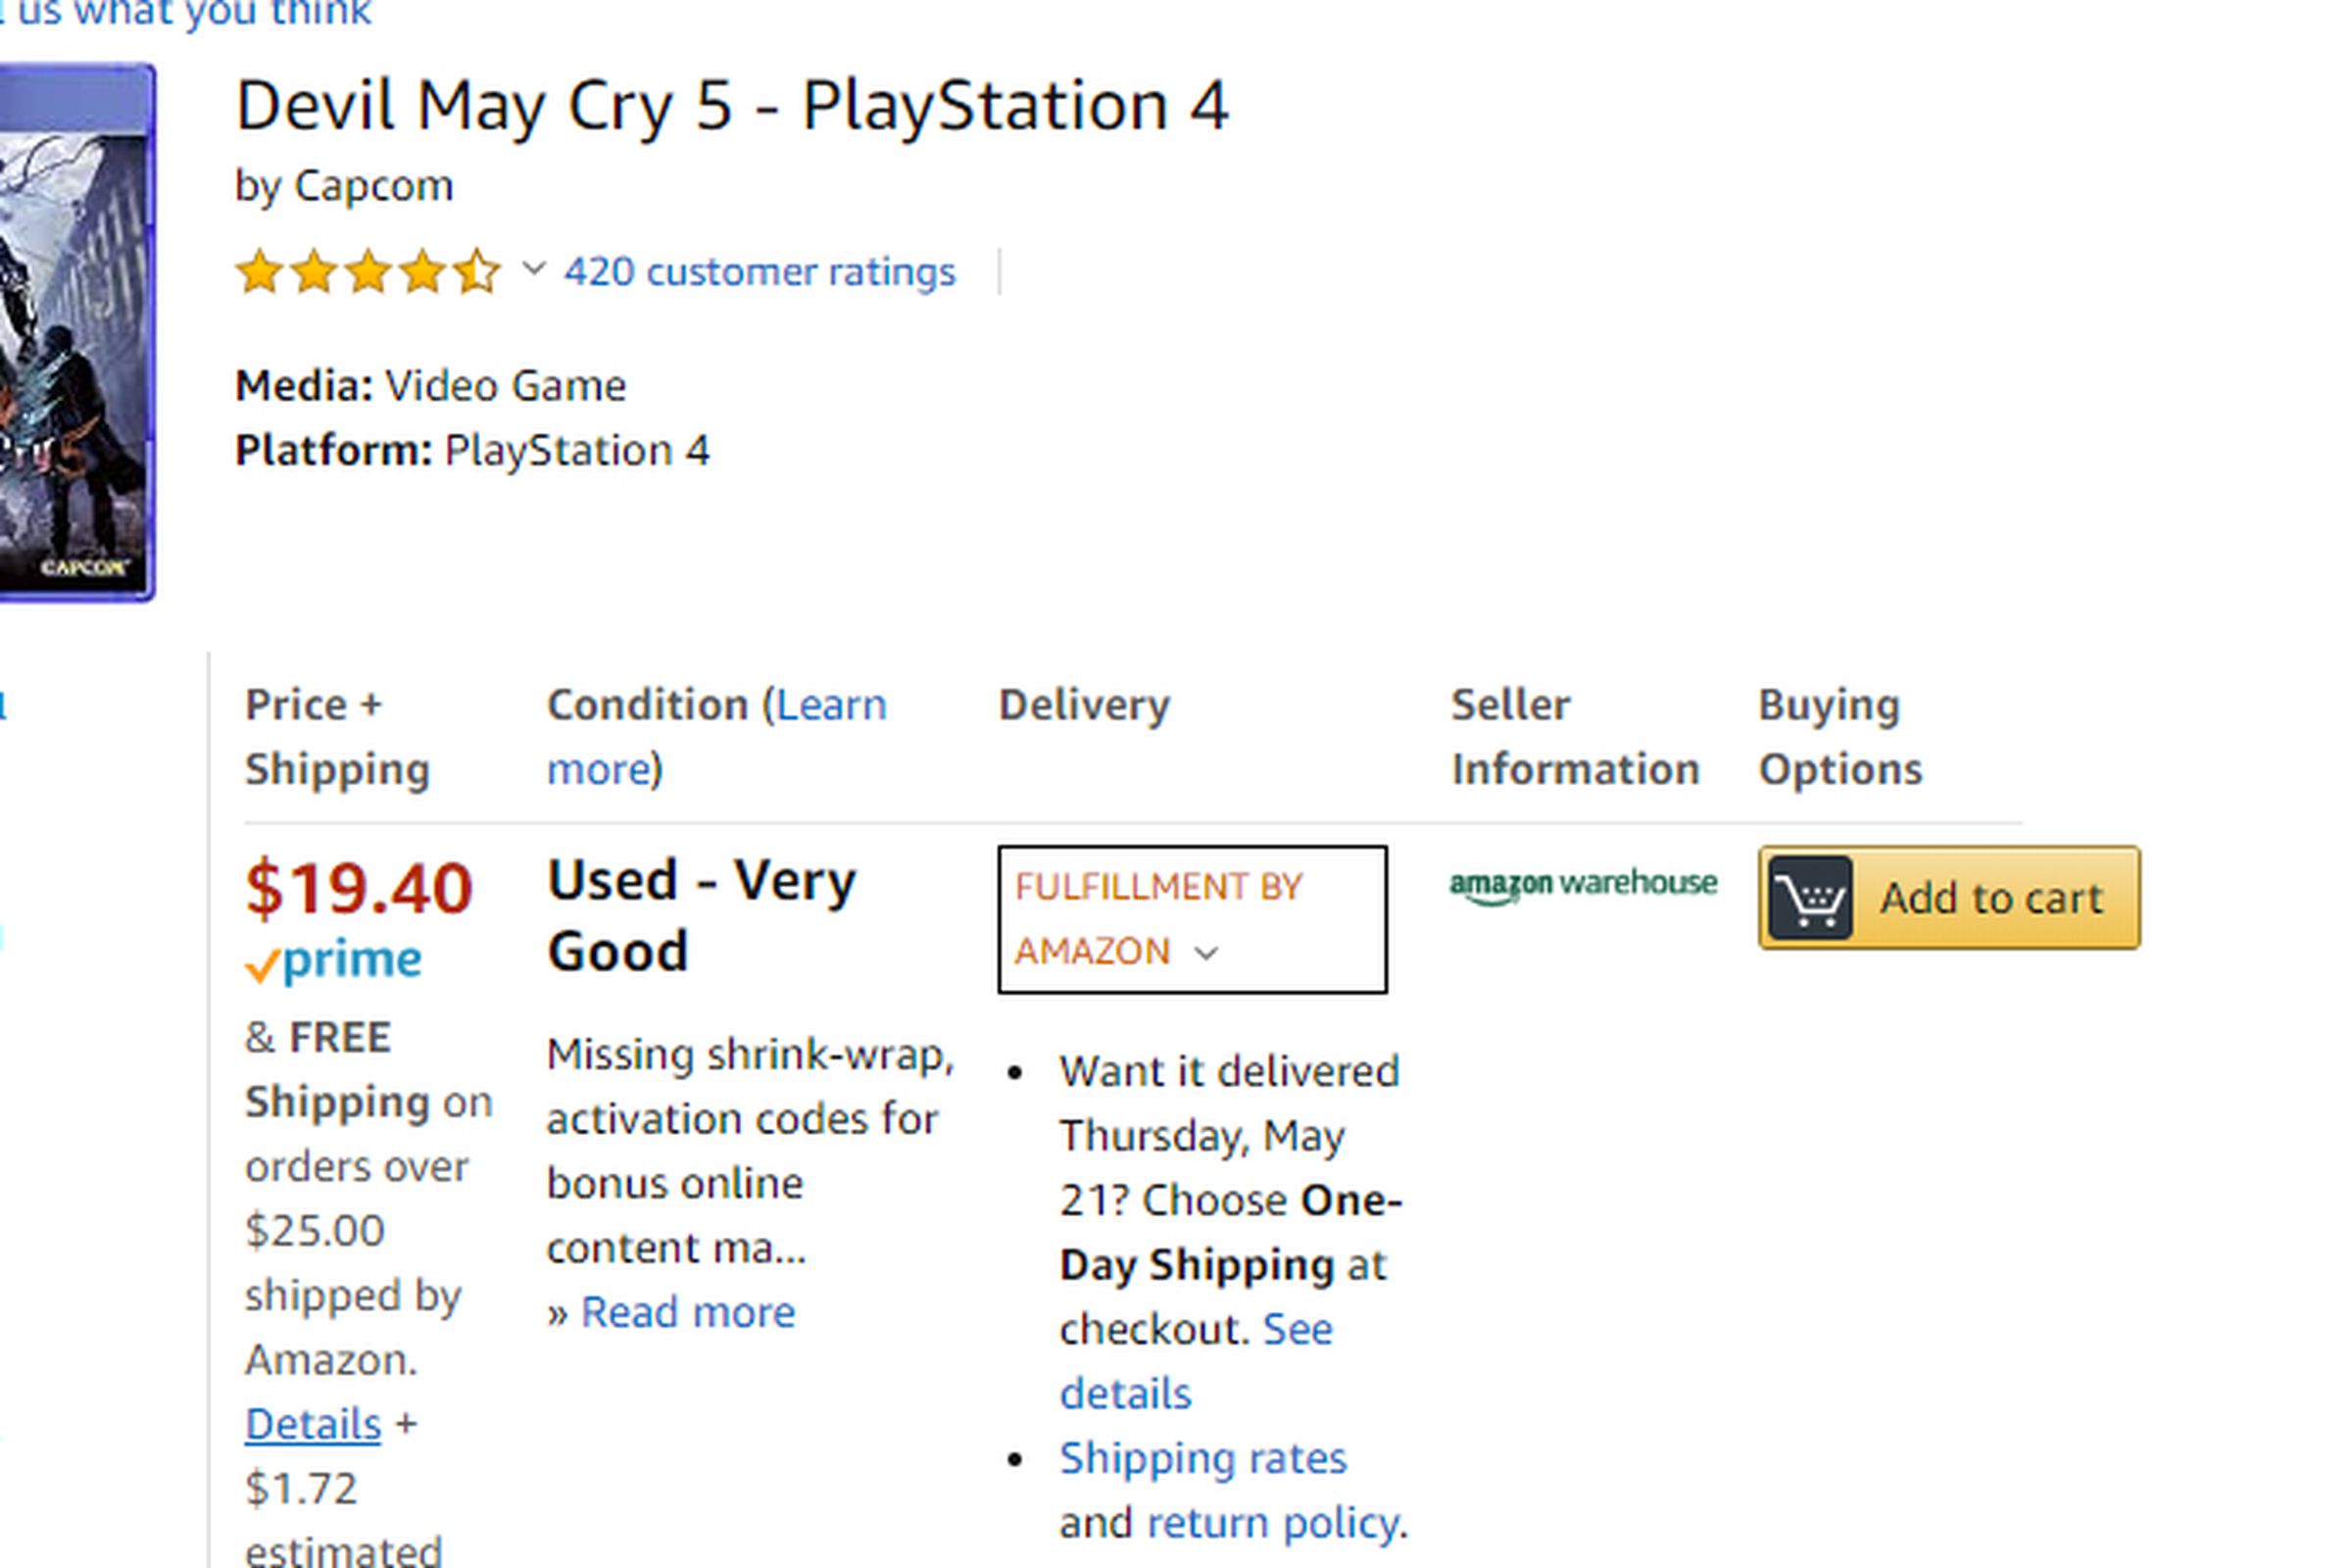 Amazon Warehouse listing for Devil May Cry 5